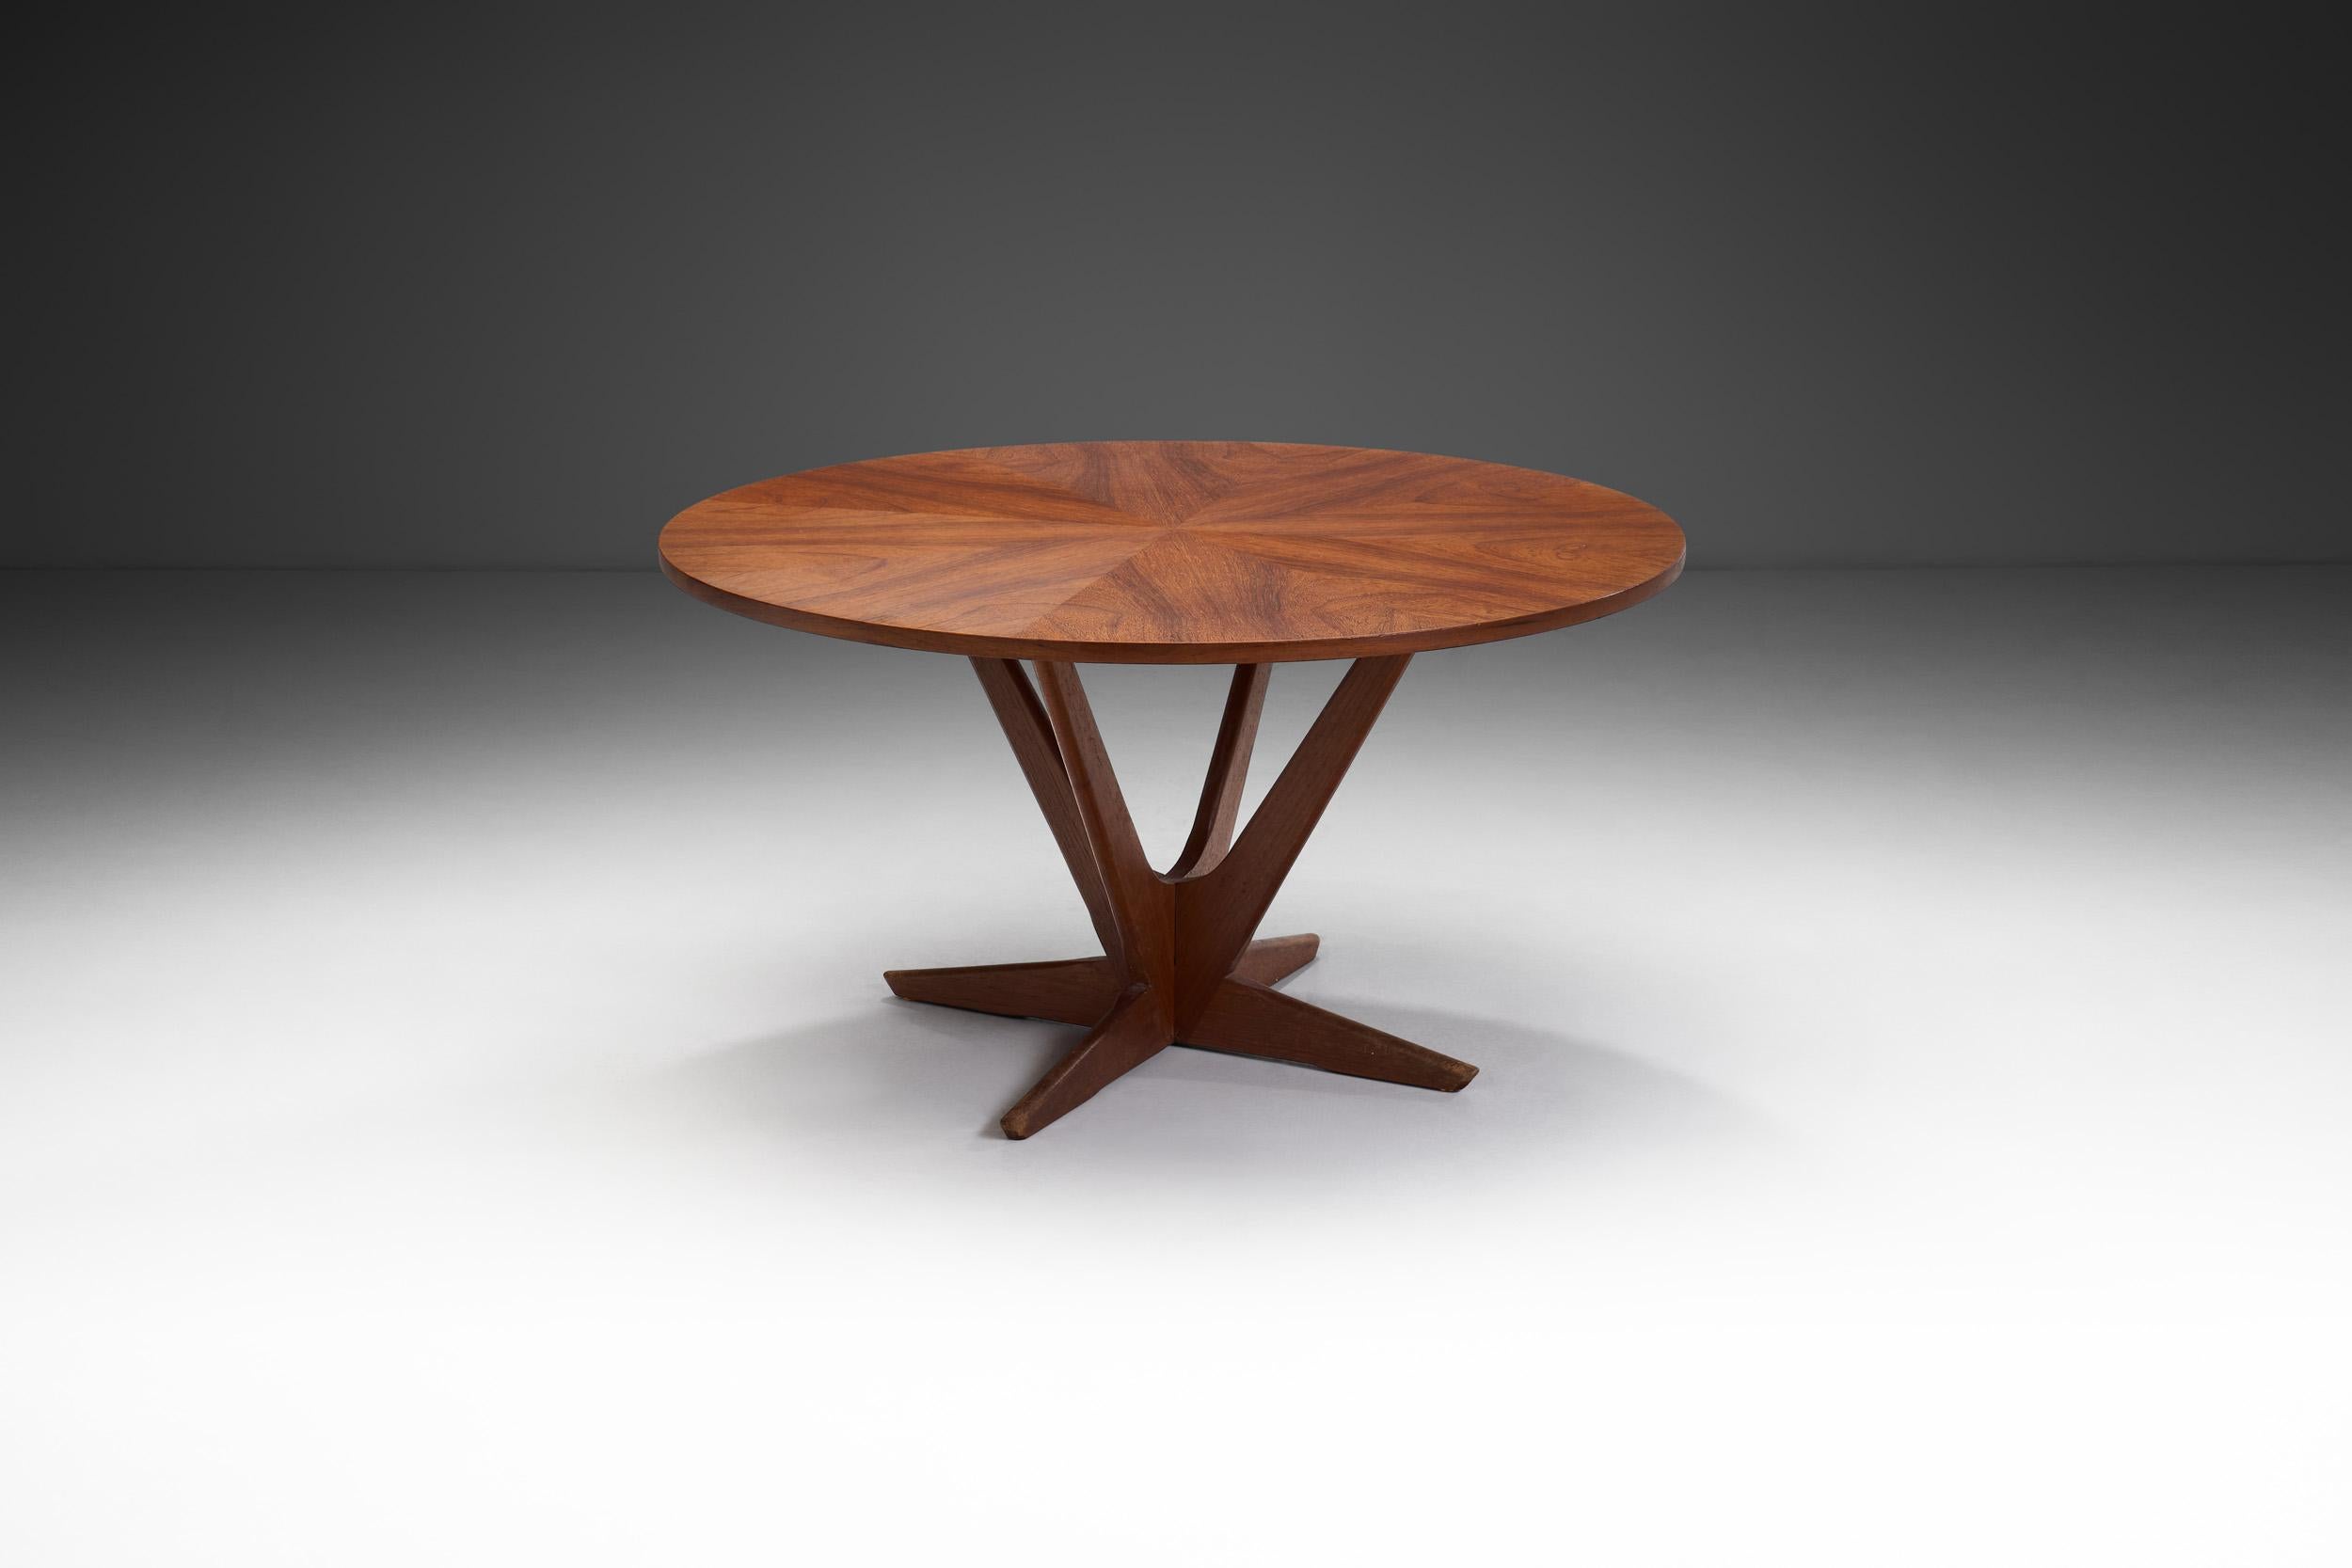 Danish pieces like this coffee table showcase balance with a classic, timeless design. With a clear statement of simplicity and an emphasis on material quality, this table is a great example of “Danish Modern” design. The base is made of solid wood,